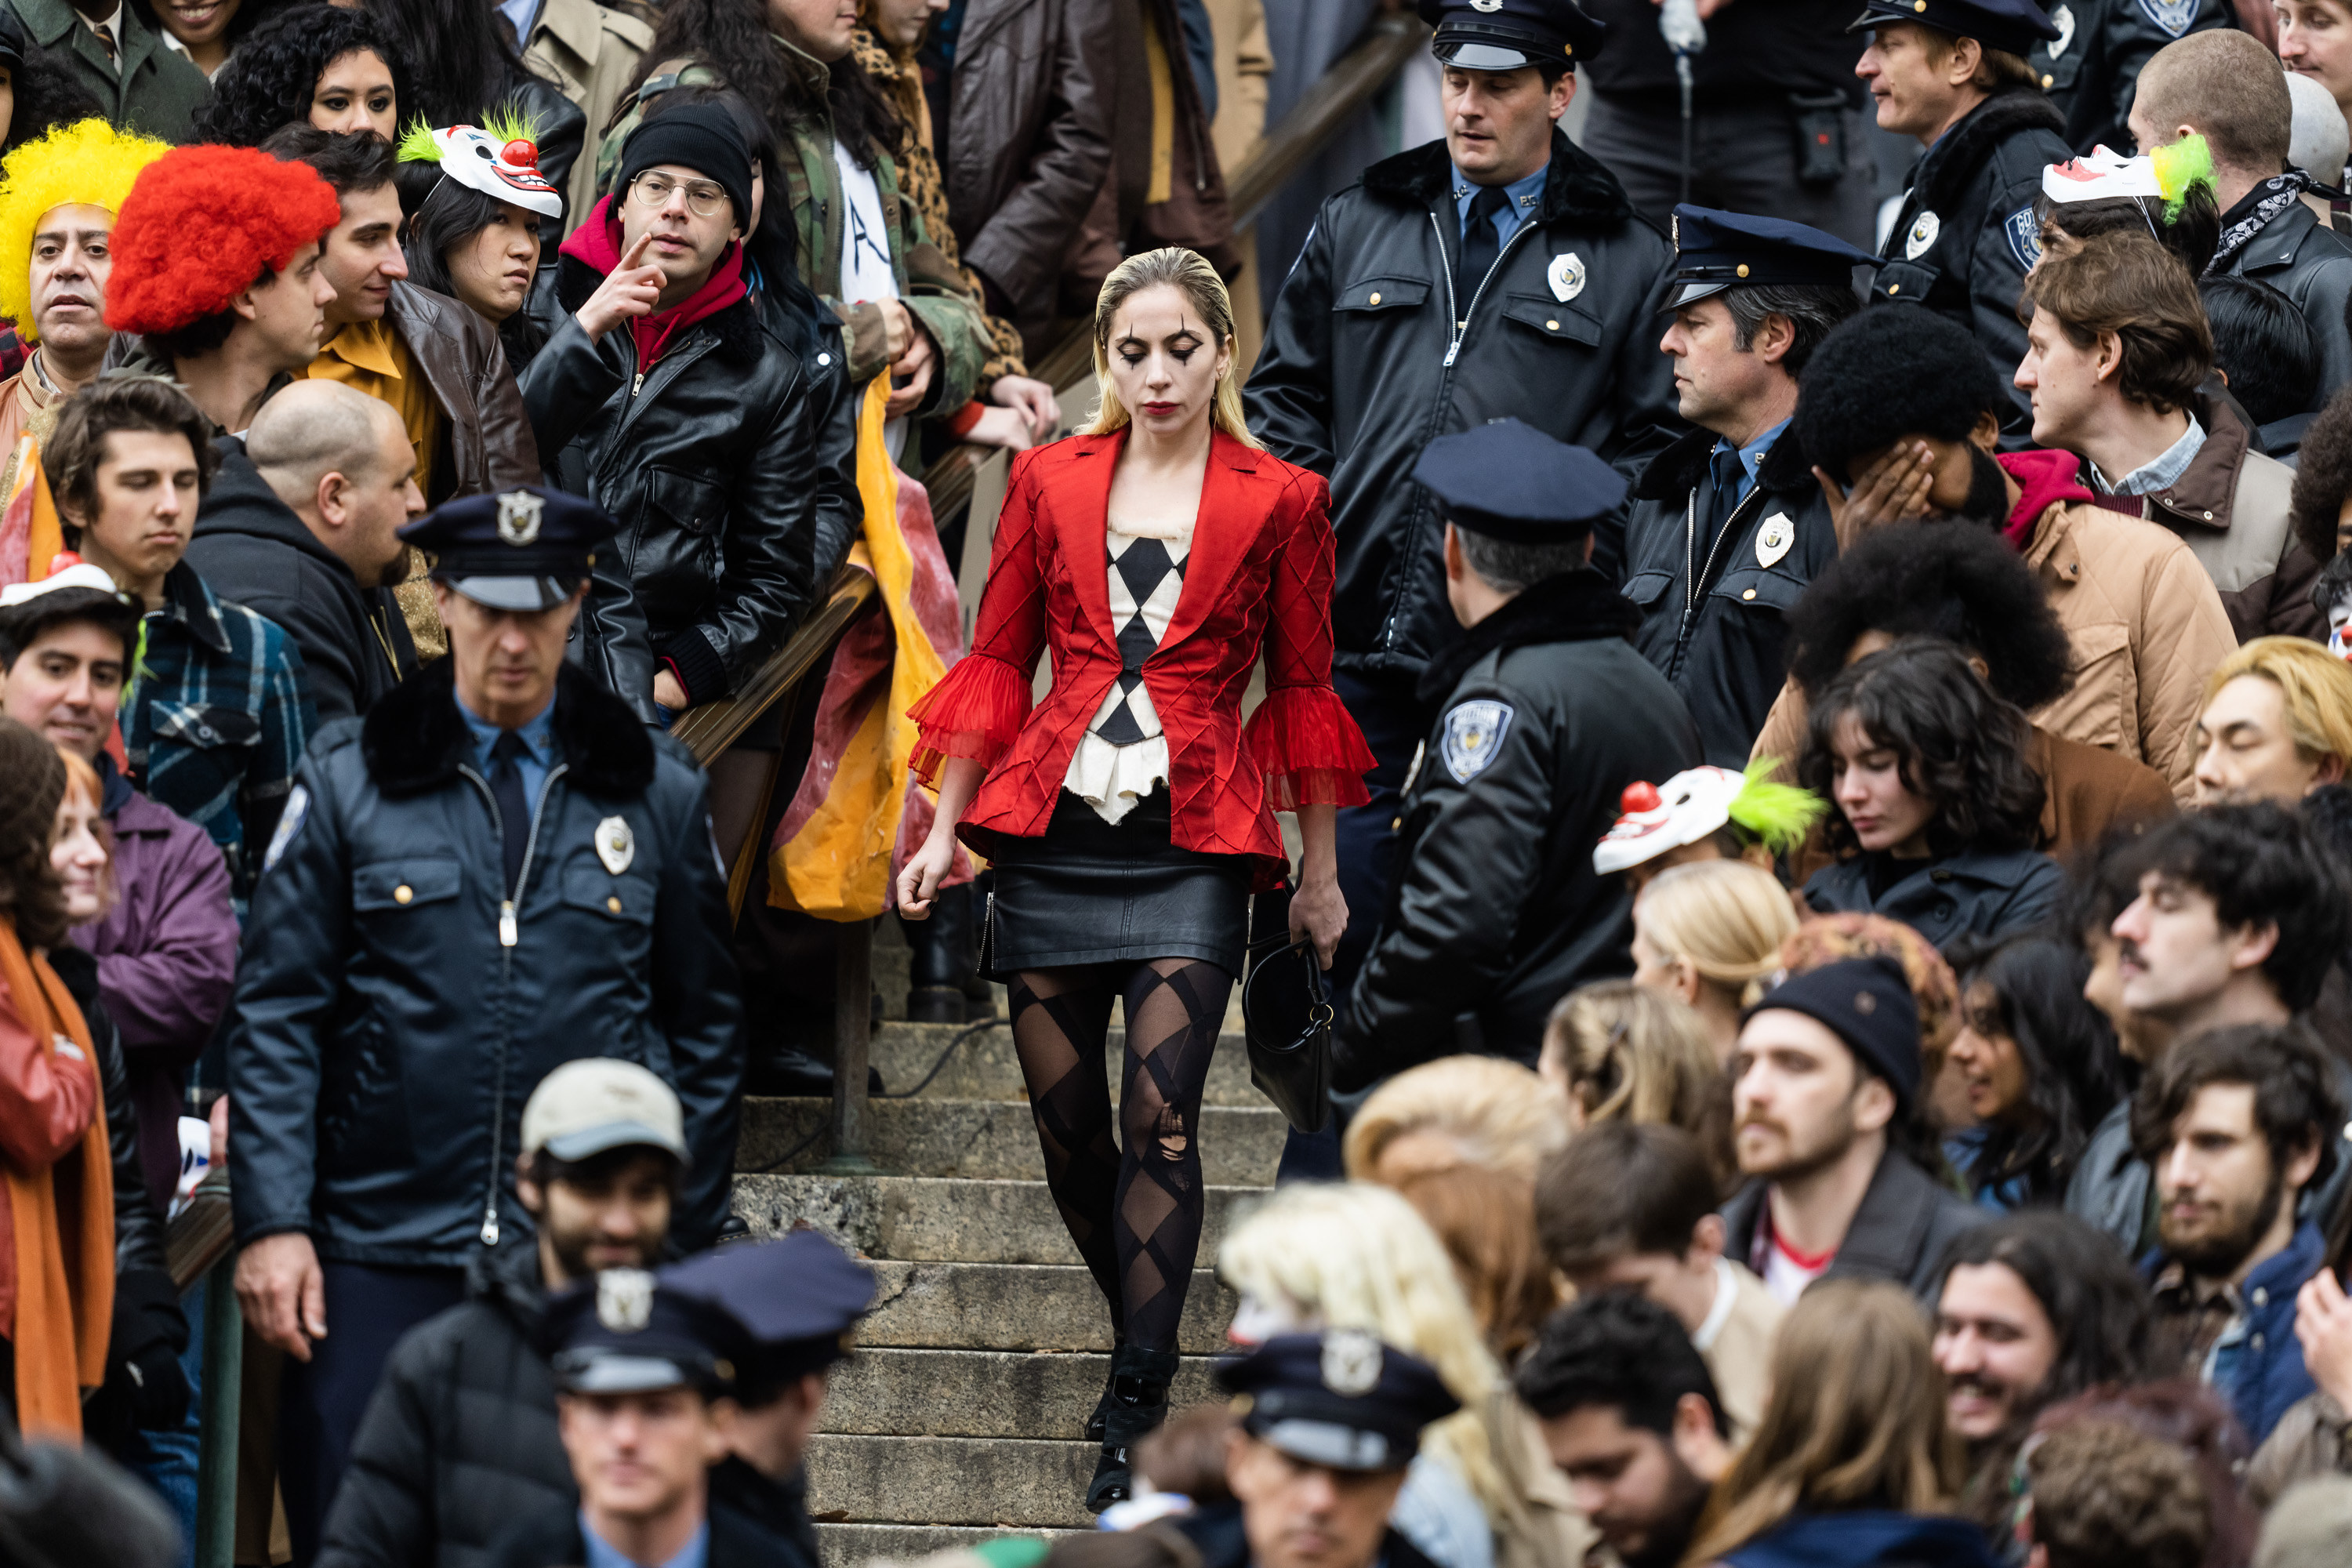 lady gaga in a crowd of people during filming